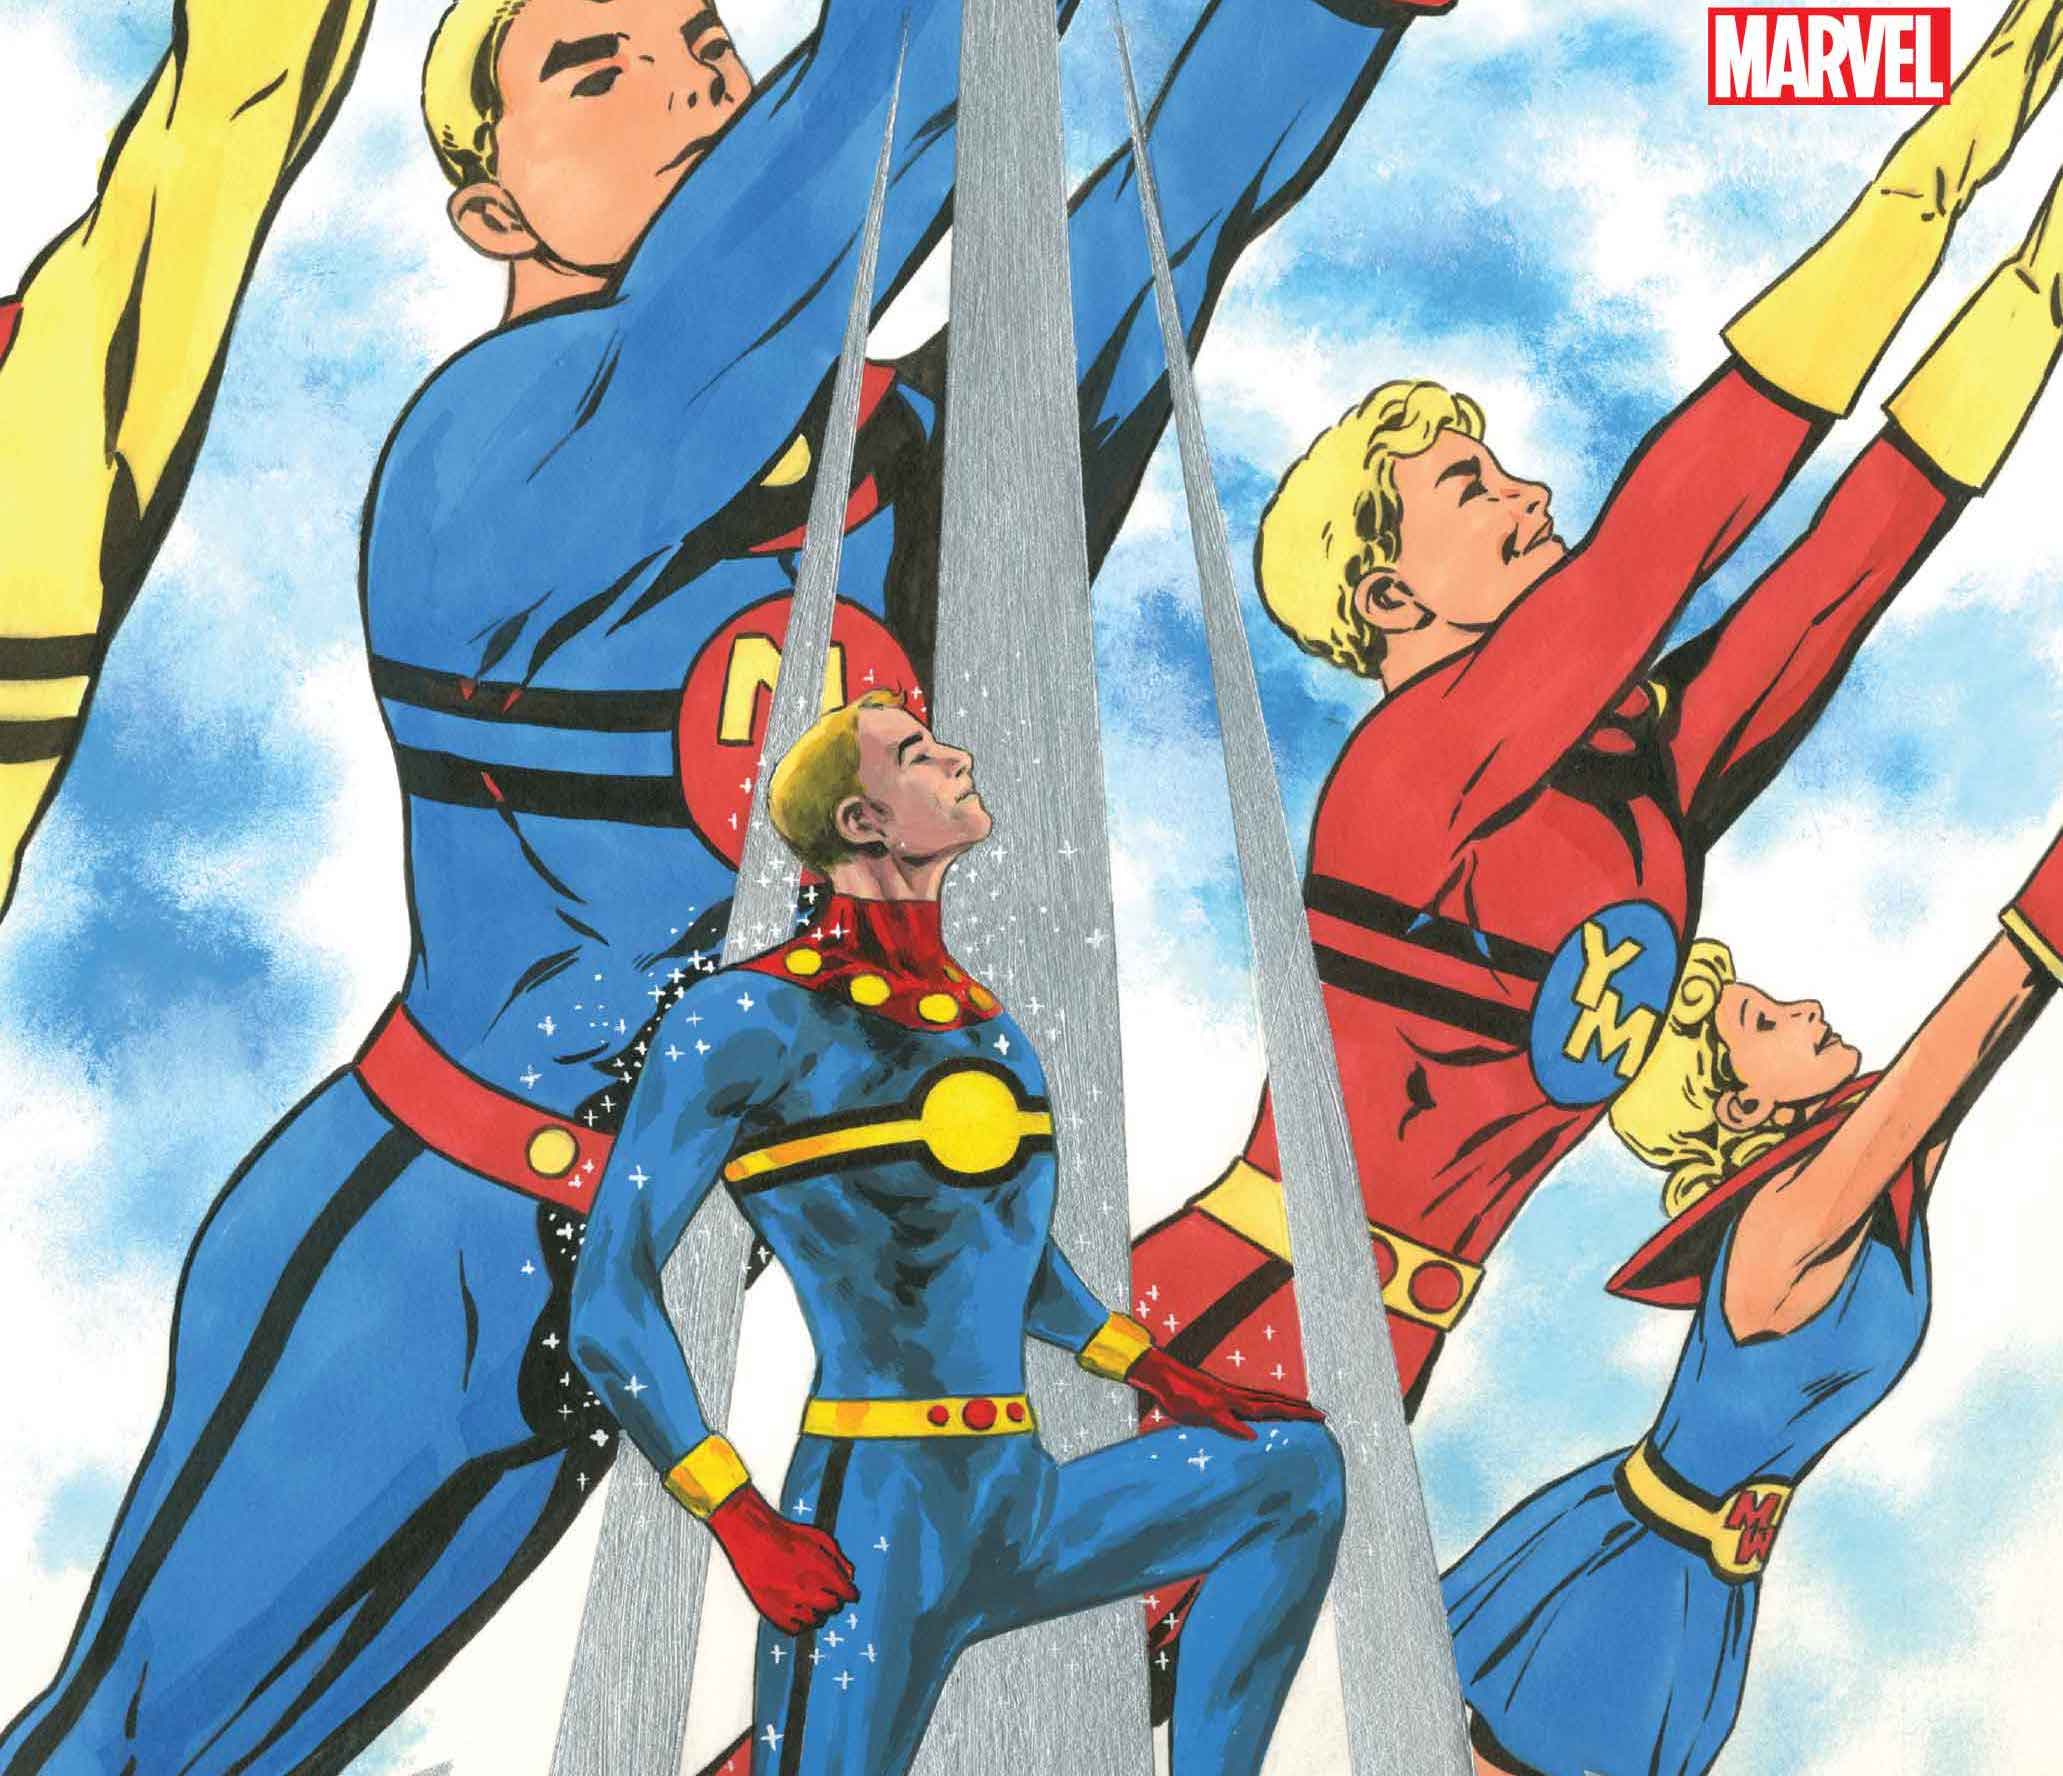 Marvel reveals remastered art from 'Miracleman: The Silver Age' #1